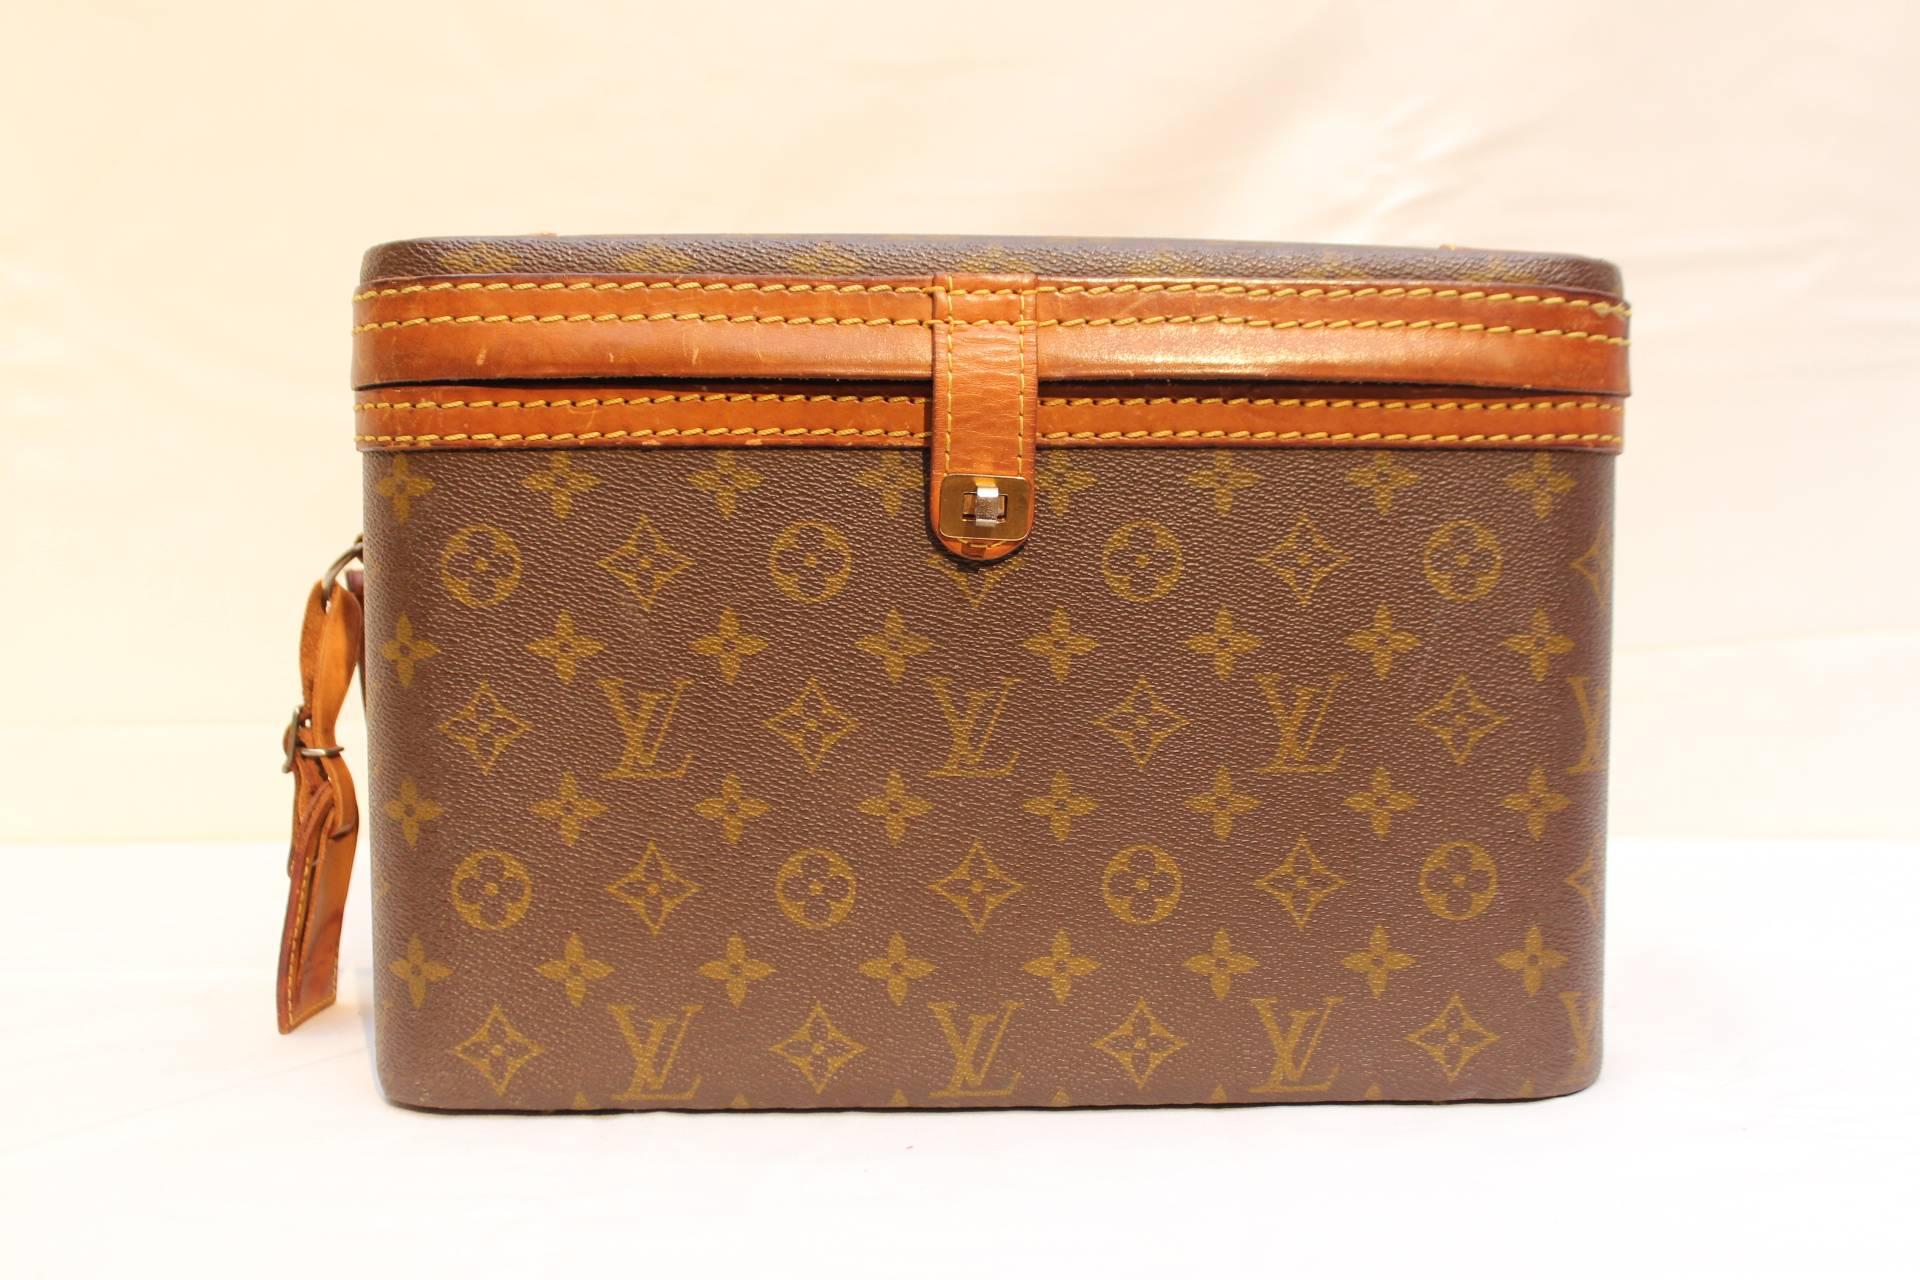 This beautiful vintage Louis Vuitton vanity case was made during the 1980's. Authentic details from Louis Vuitton are recognizable : monogram 